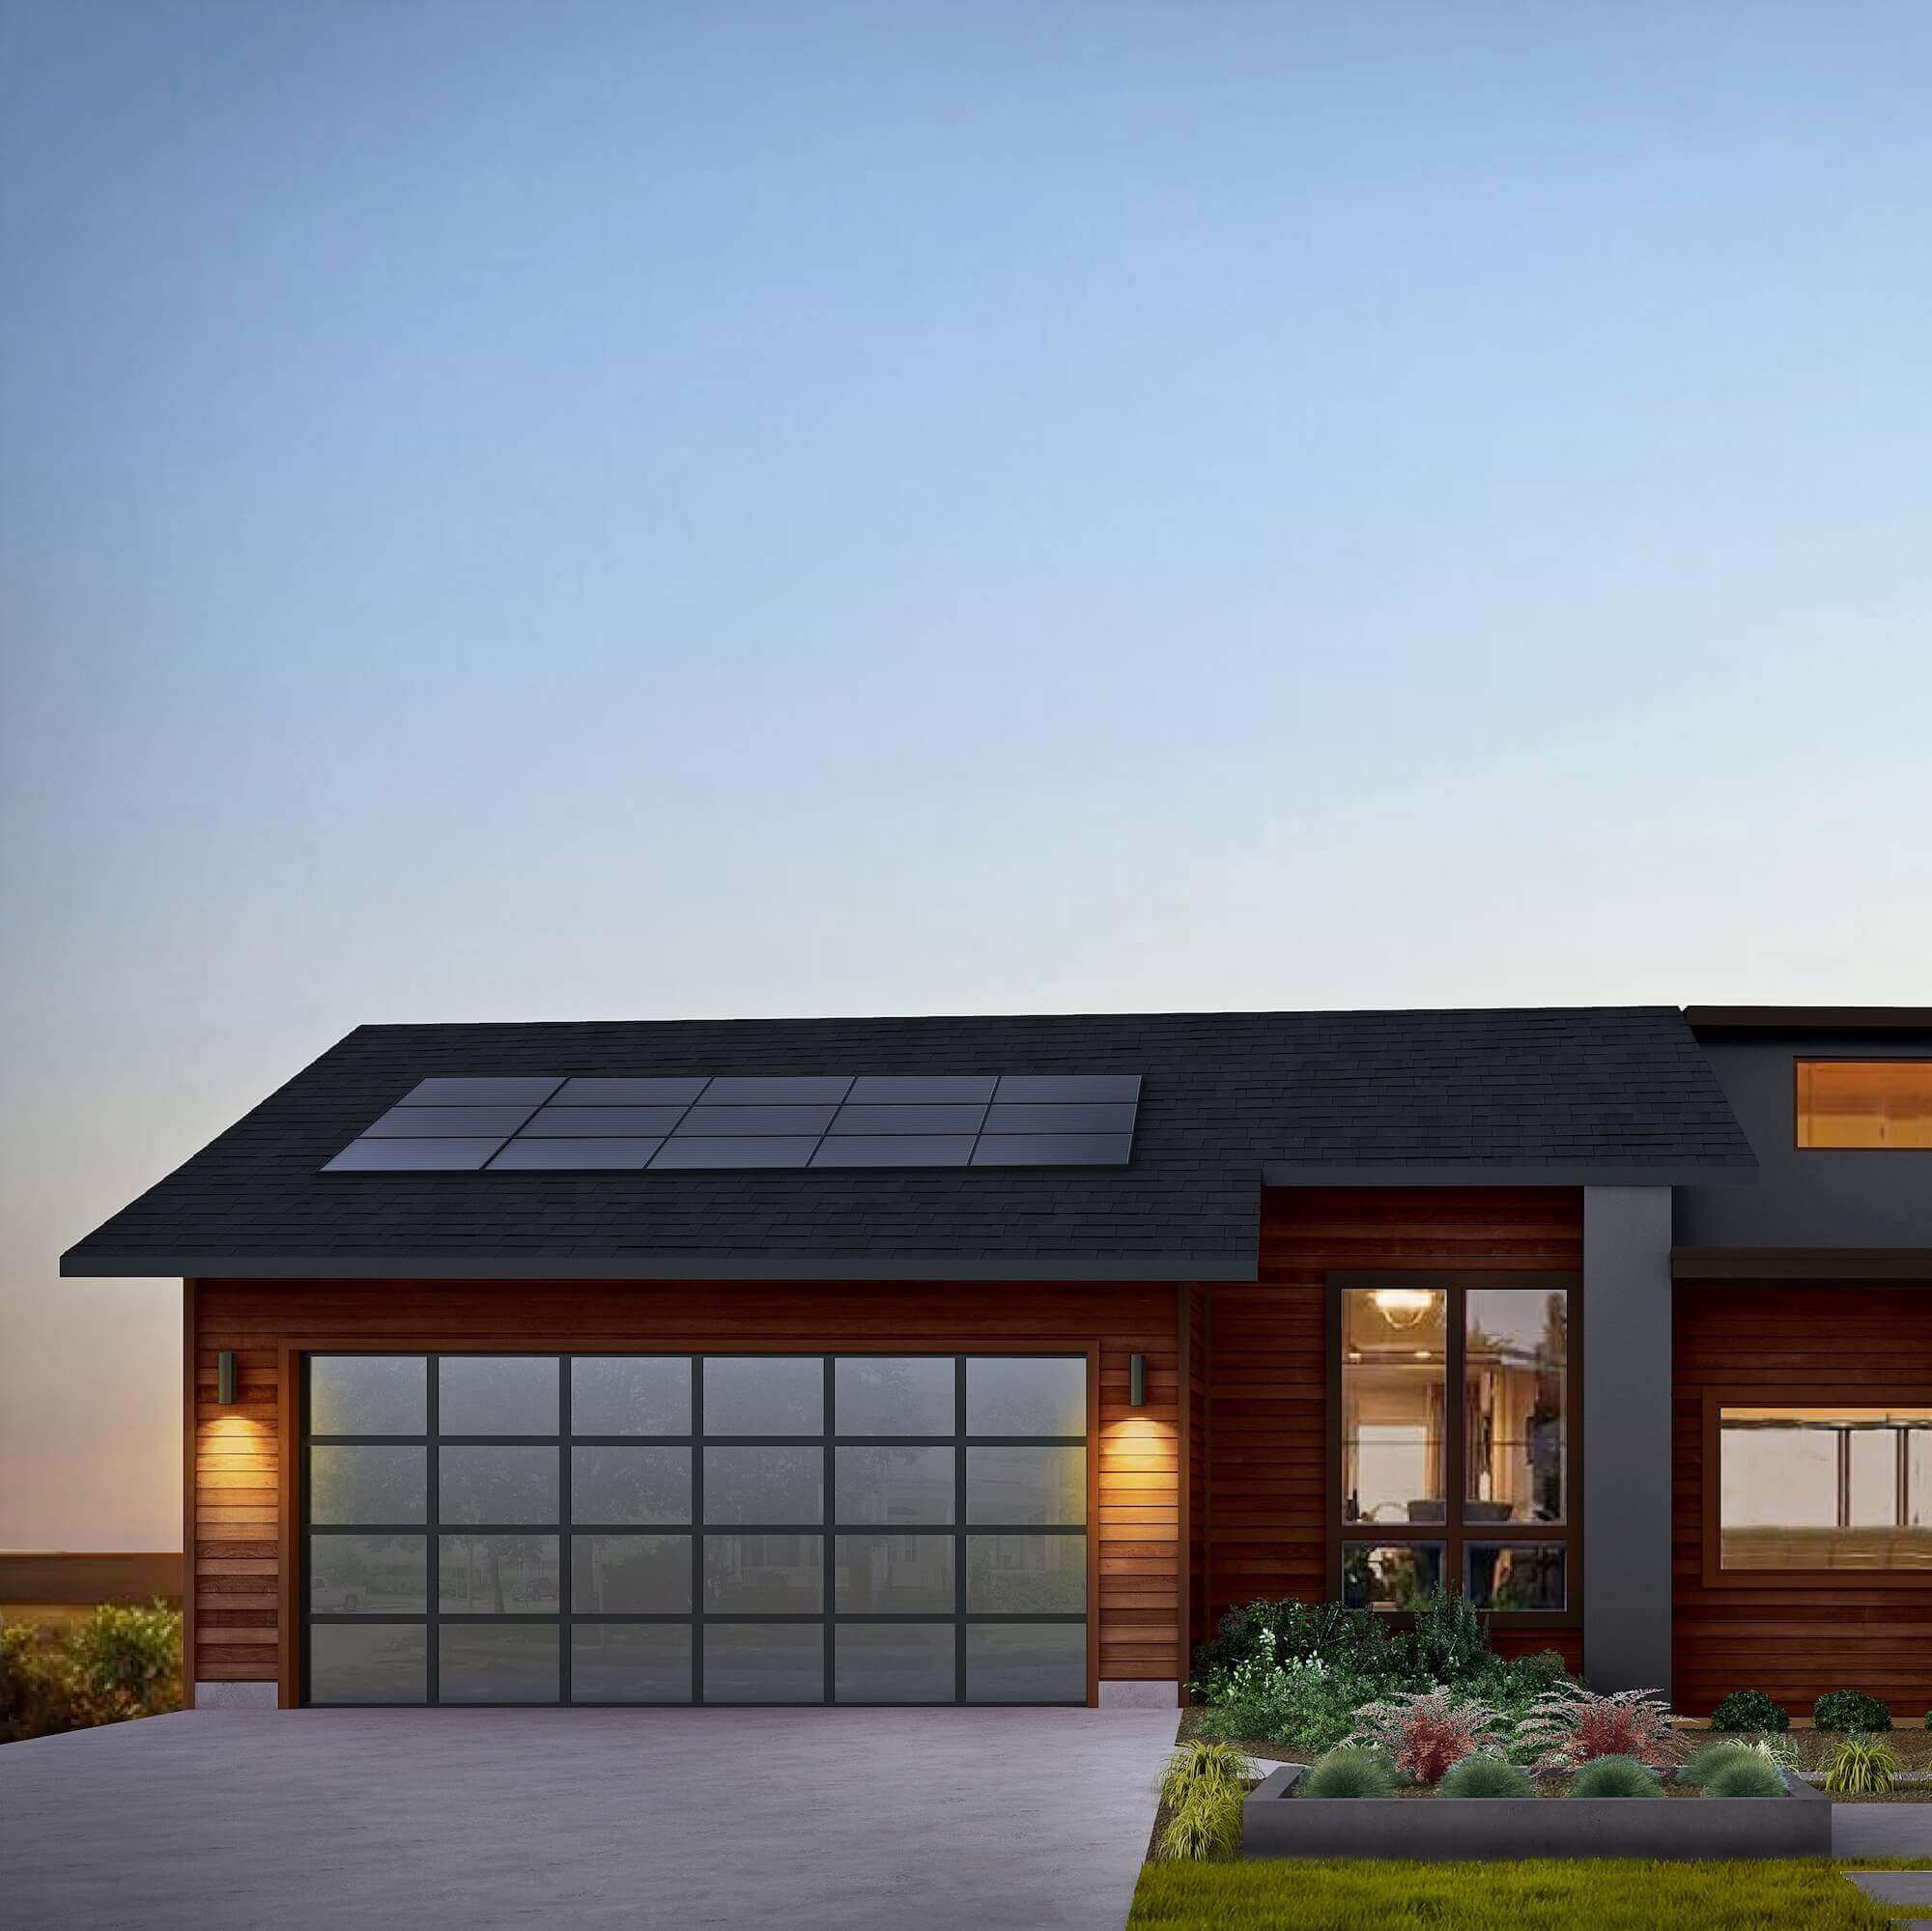 One level home with glass grid-garage door, solar panels, and dark-toned exterior